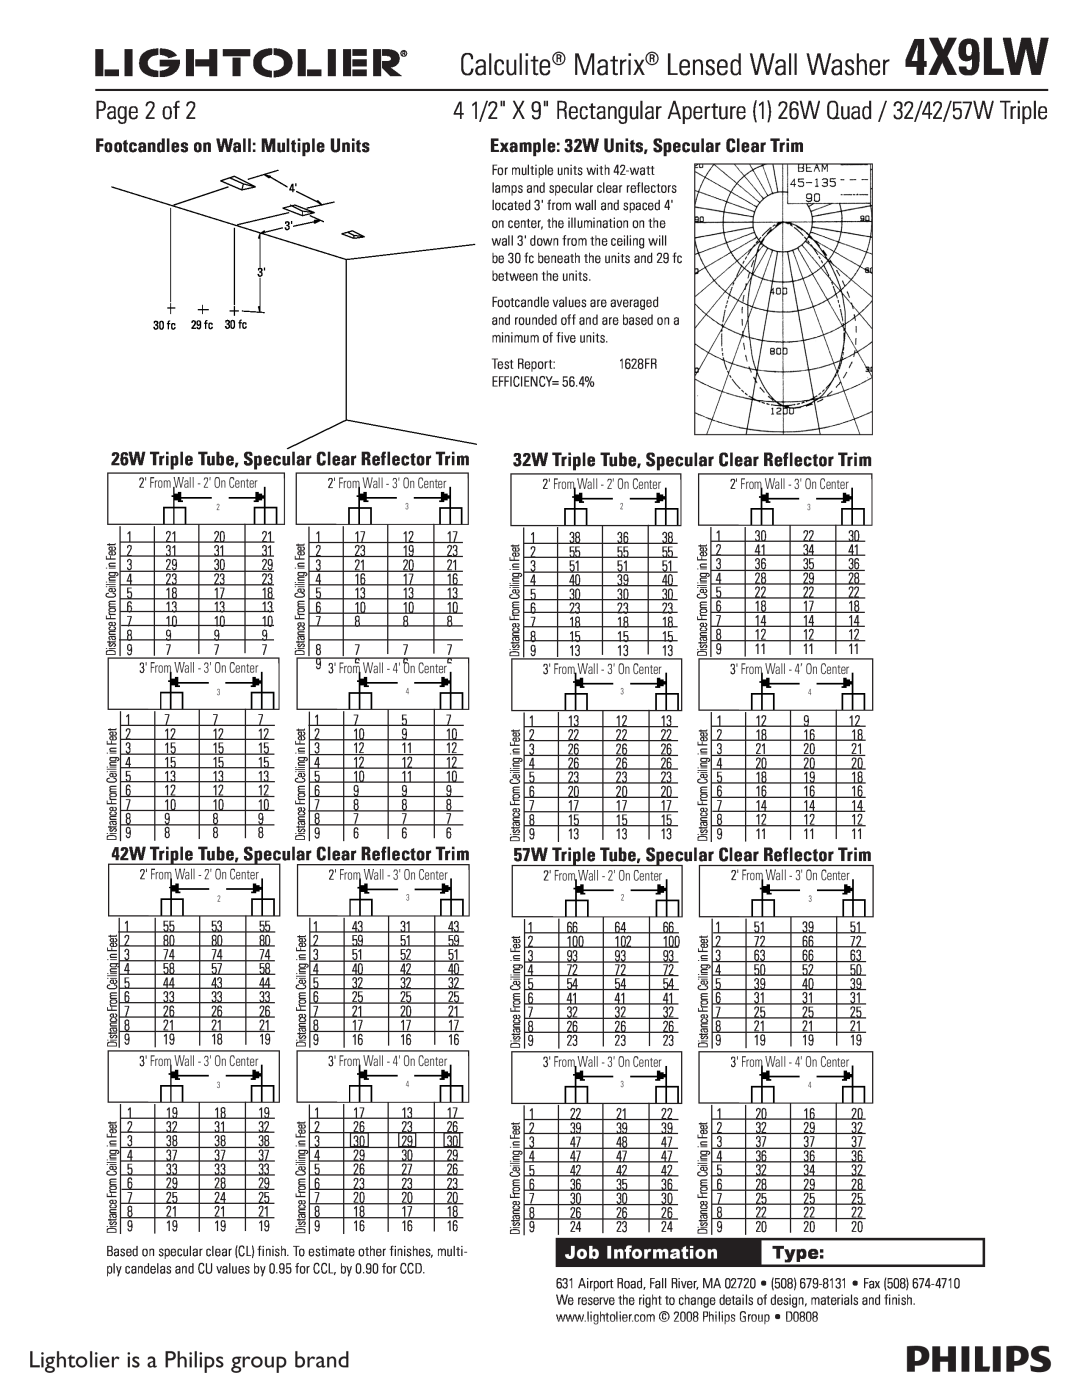 Lightolier Page 2 of, Calculite Matrix Lensed Wall Washer 4X9LW, Lightolier is a Philips group brand, Job Information 